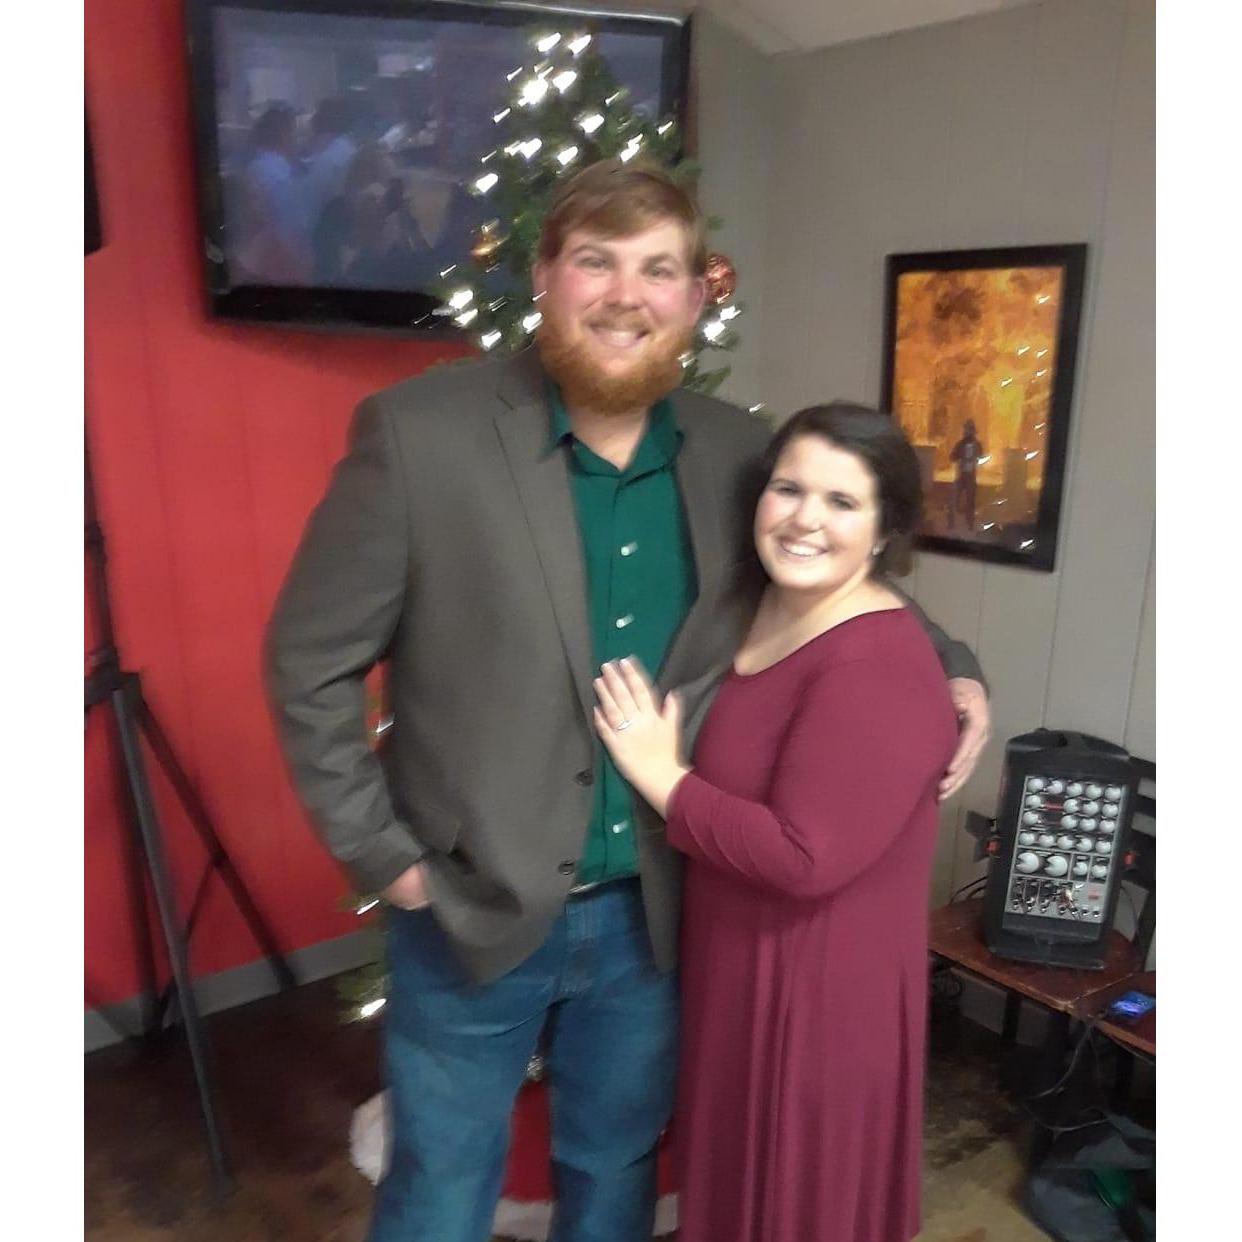 Simpson Security Employee Christmas Party! Fiance brag: We snapped this pic right before Logan won the Manager's Choice Award!